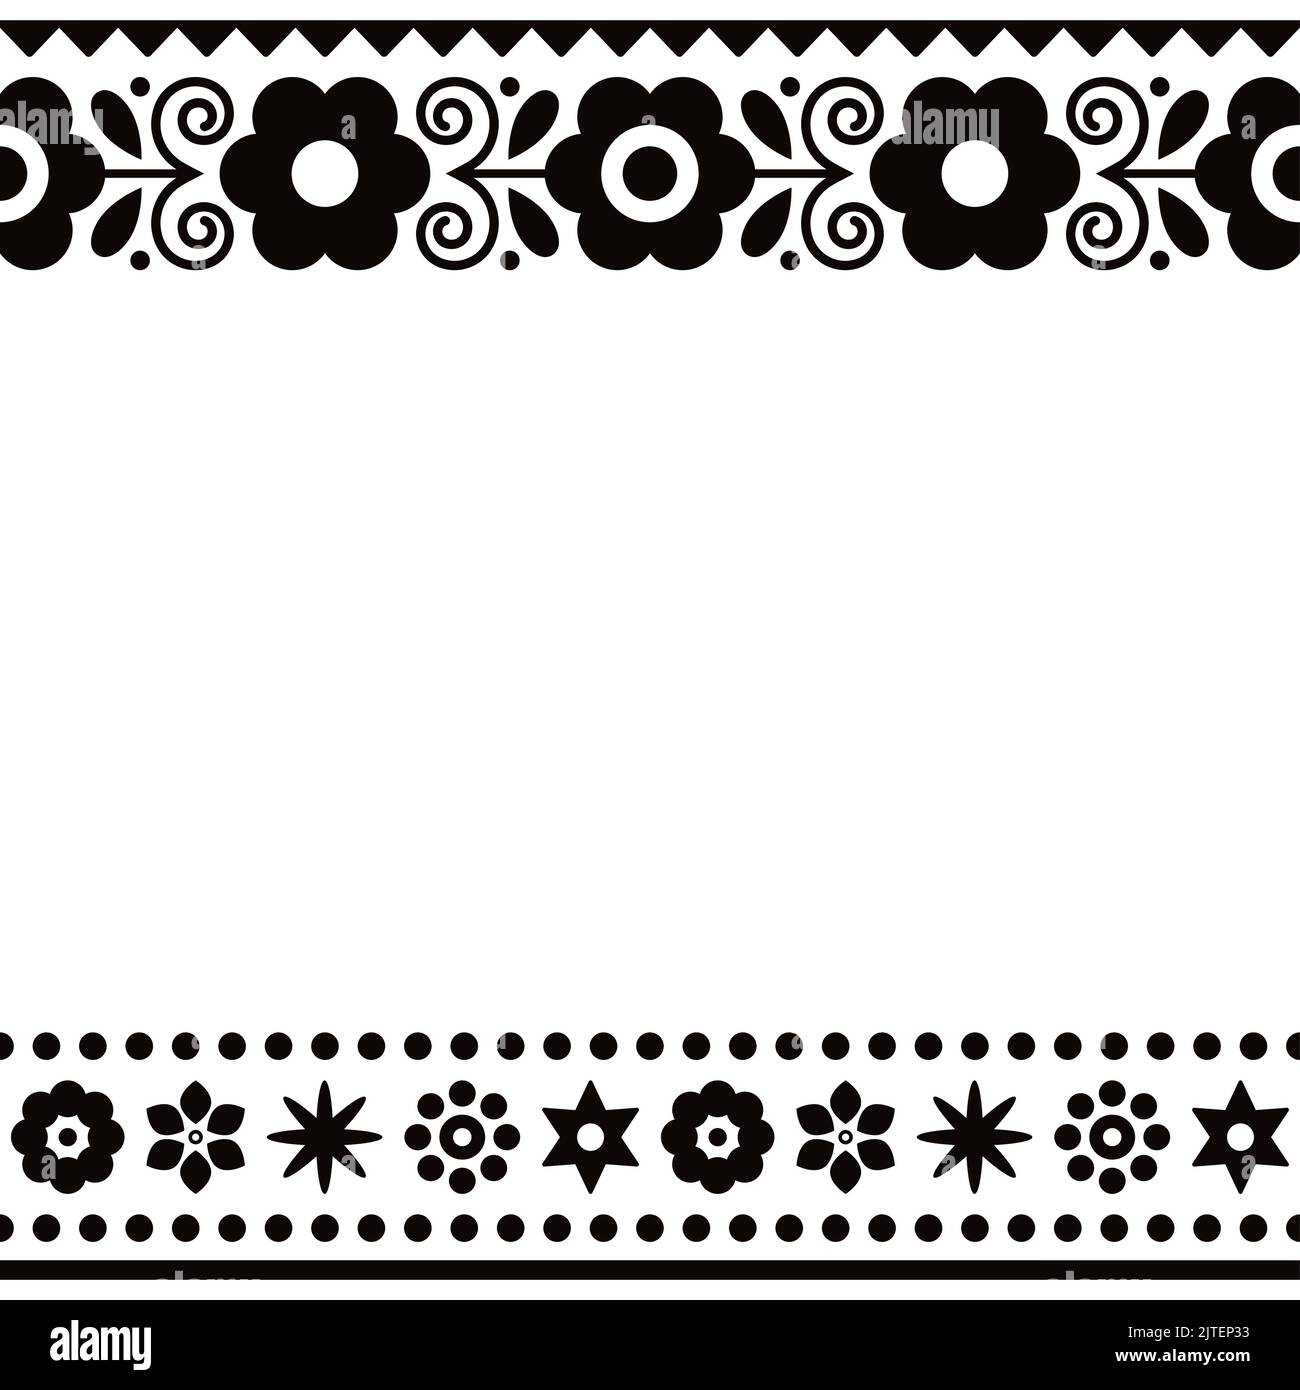 Polish folk art vector greeting card design or wedding invitation with flowers and geometric shapes in black and white Stock Vector